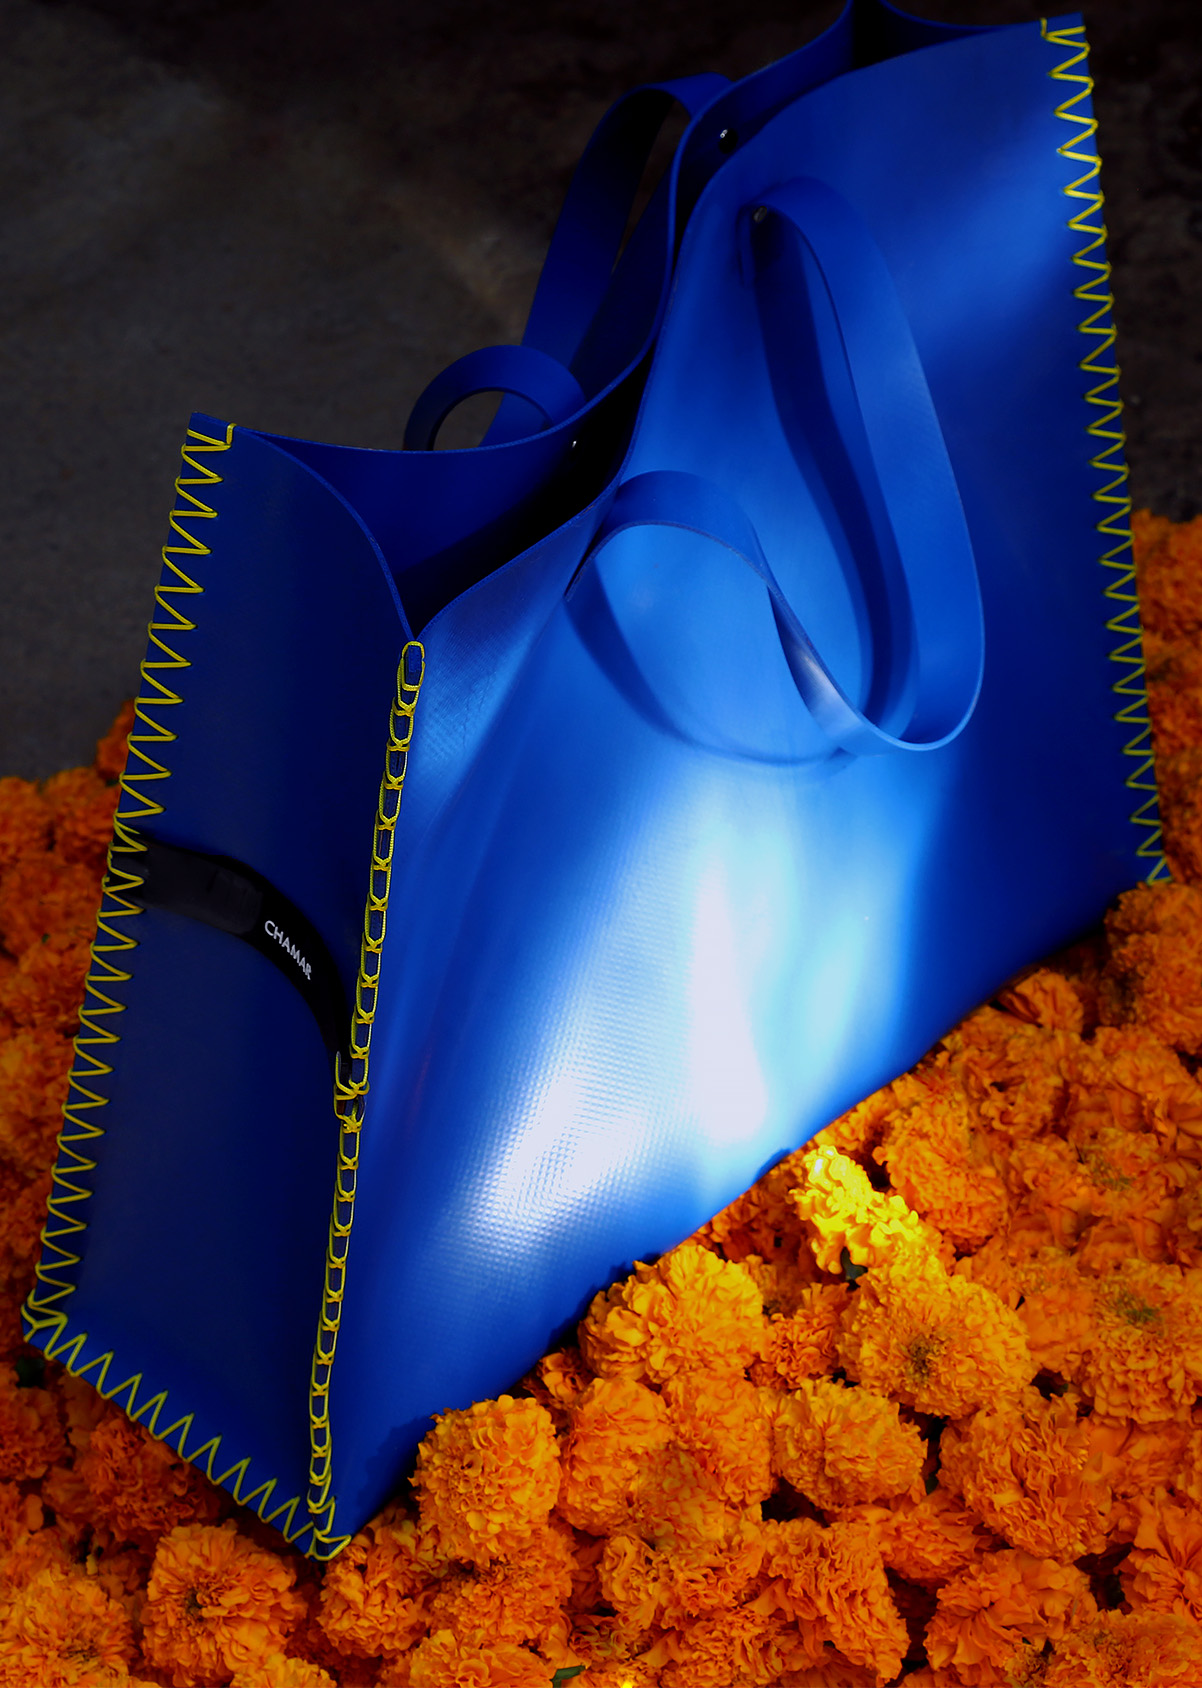 Lounge Loves: Chamar Studio's Project Blue bags